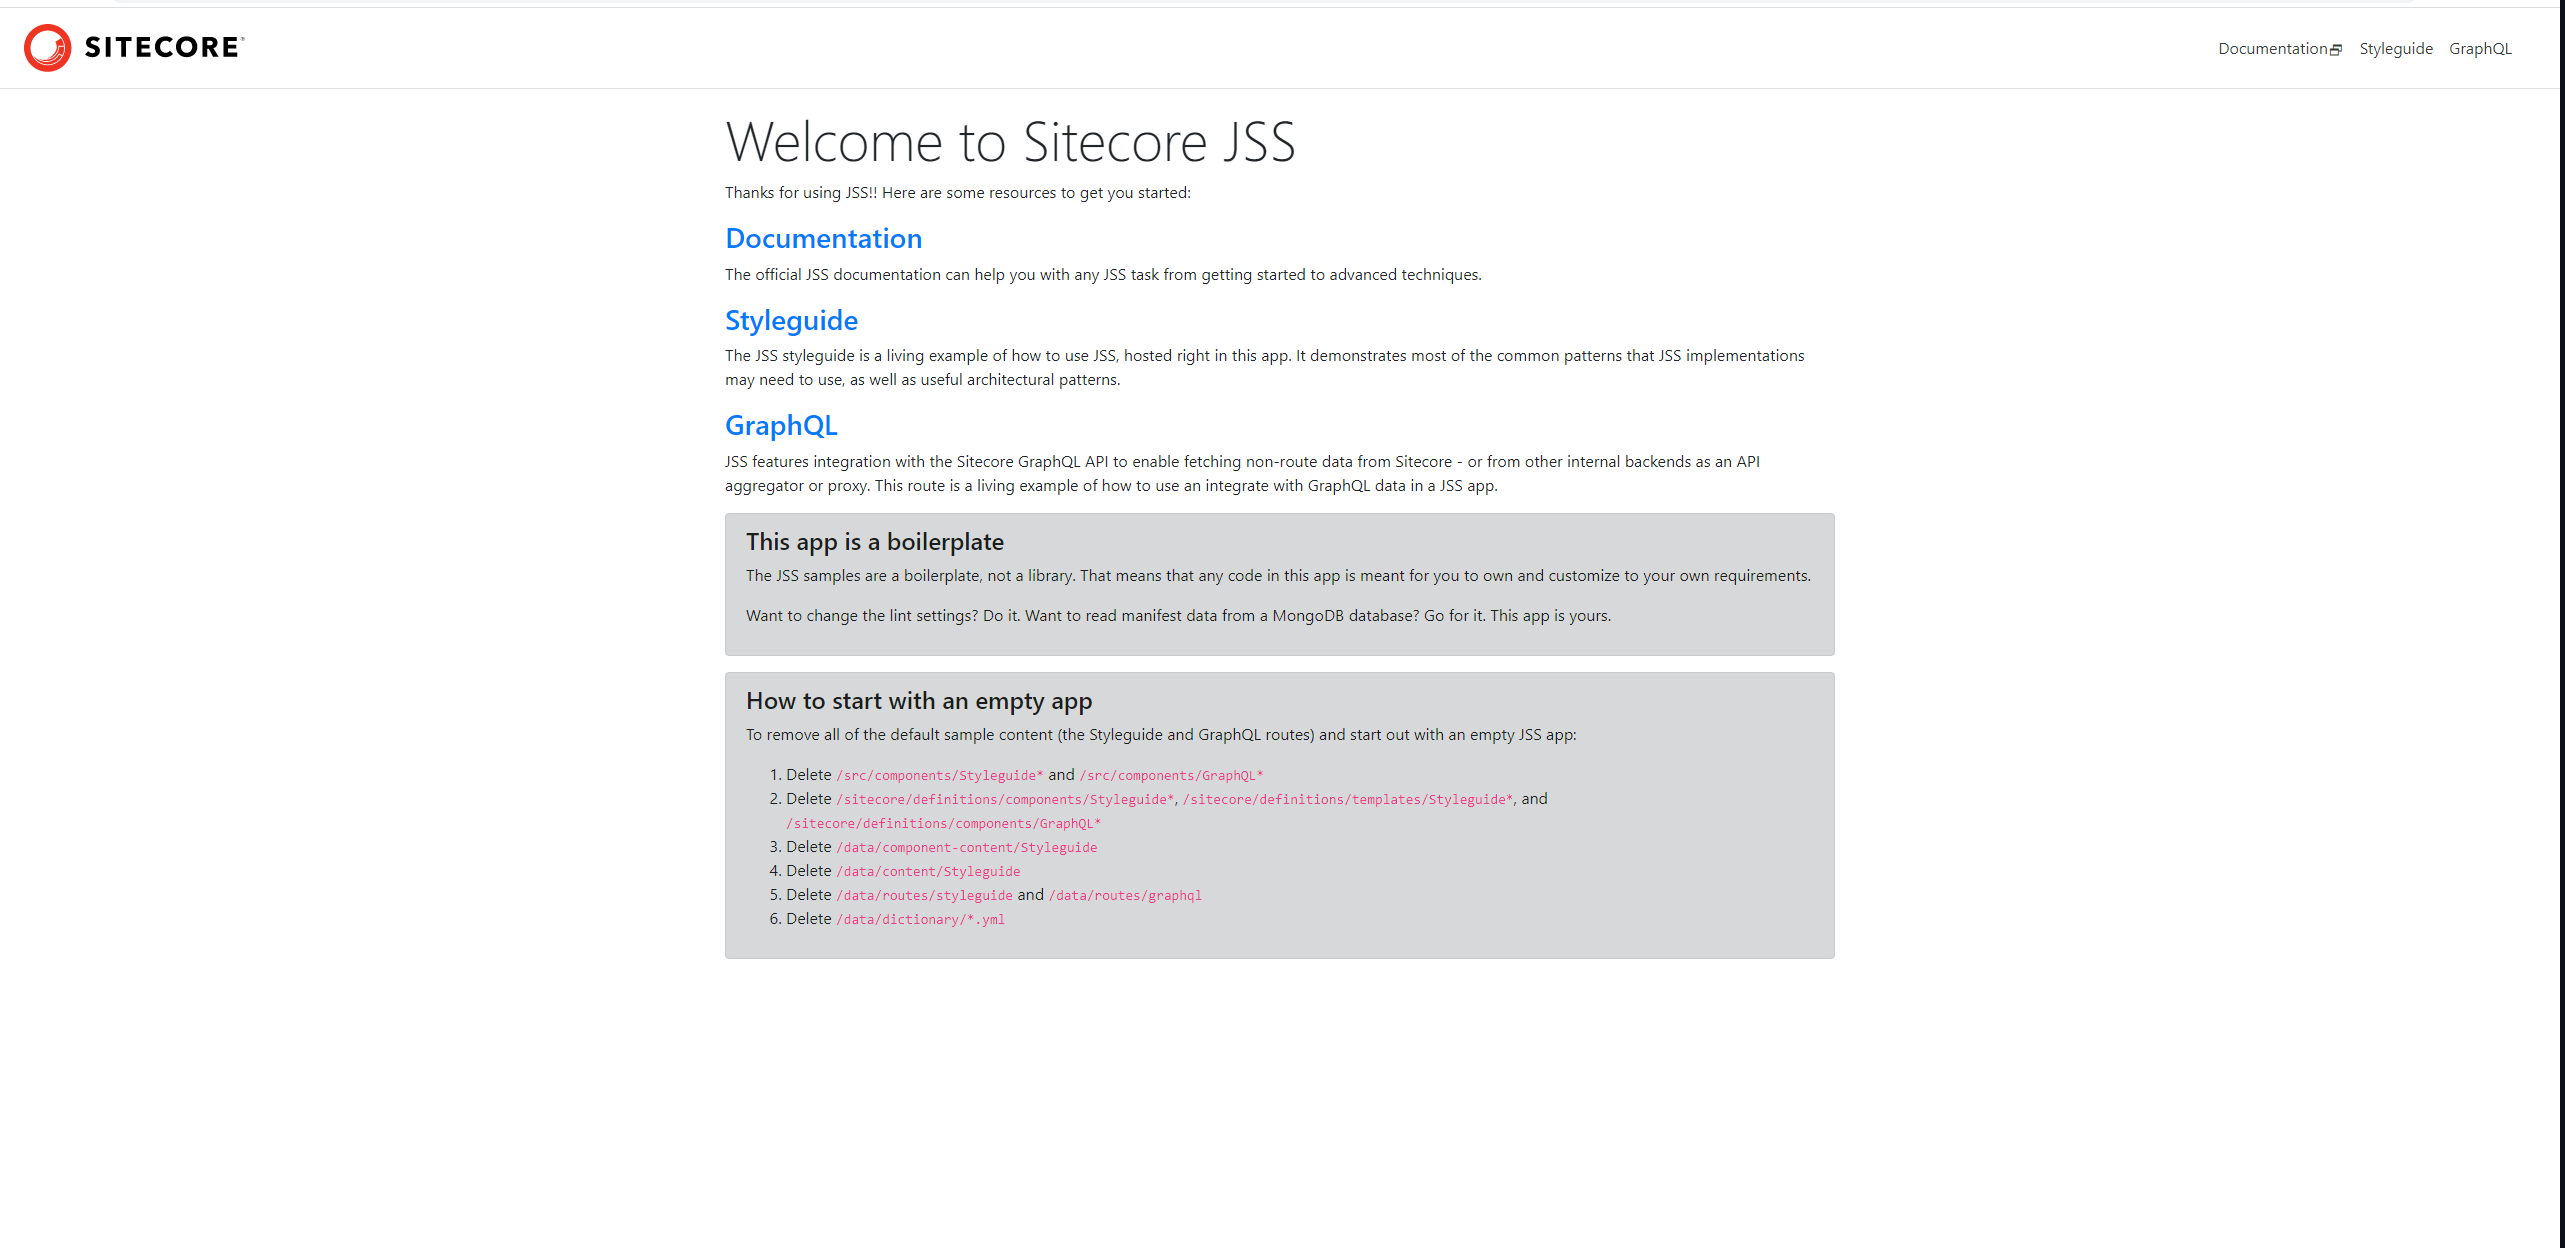 Welcome to Sitecore JSS documentation landing page.